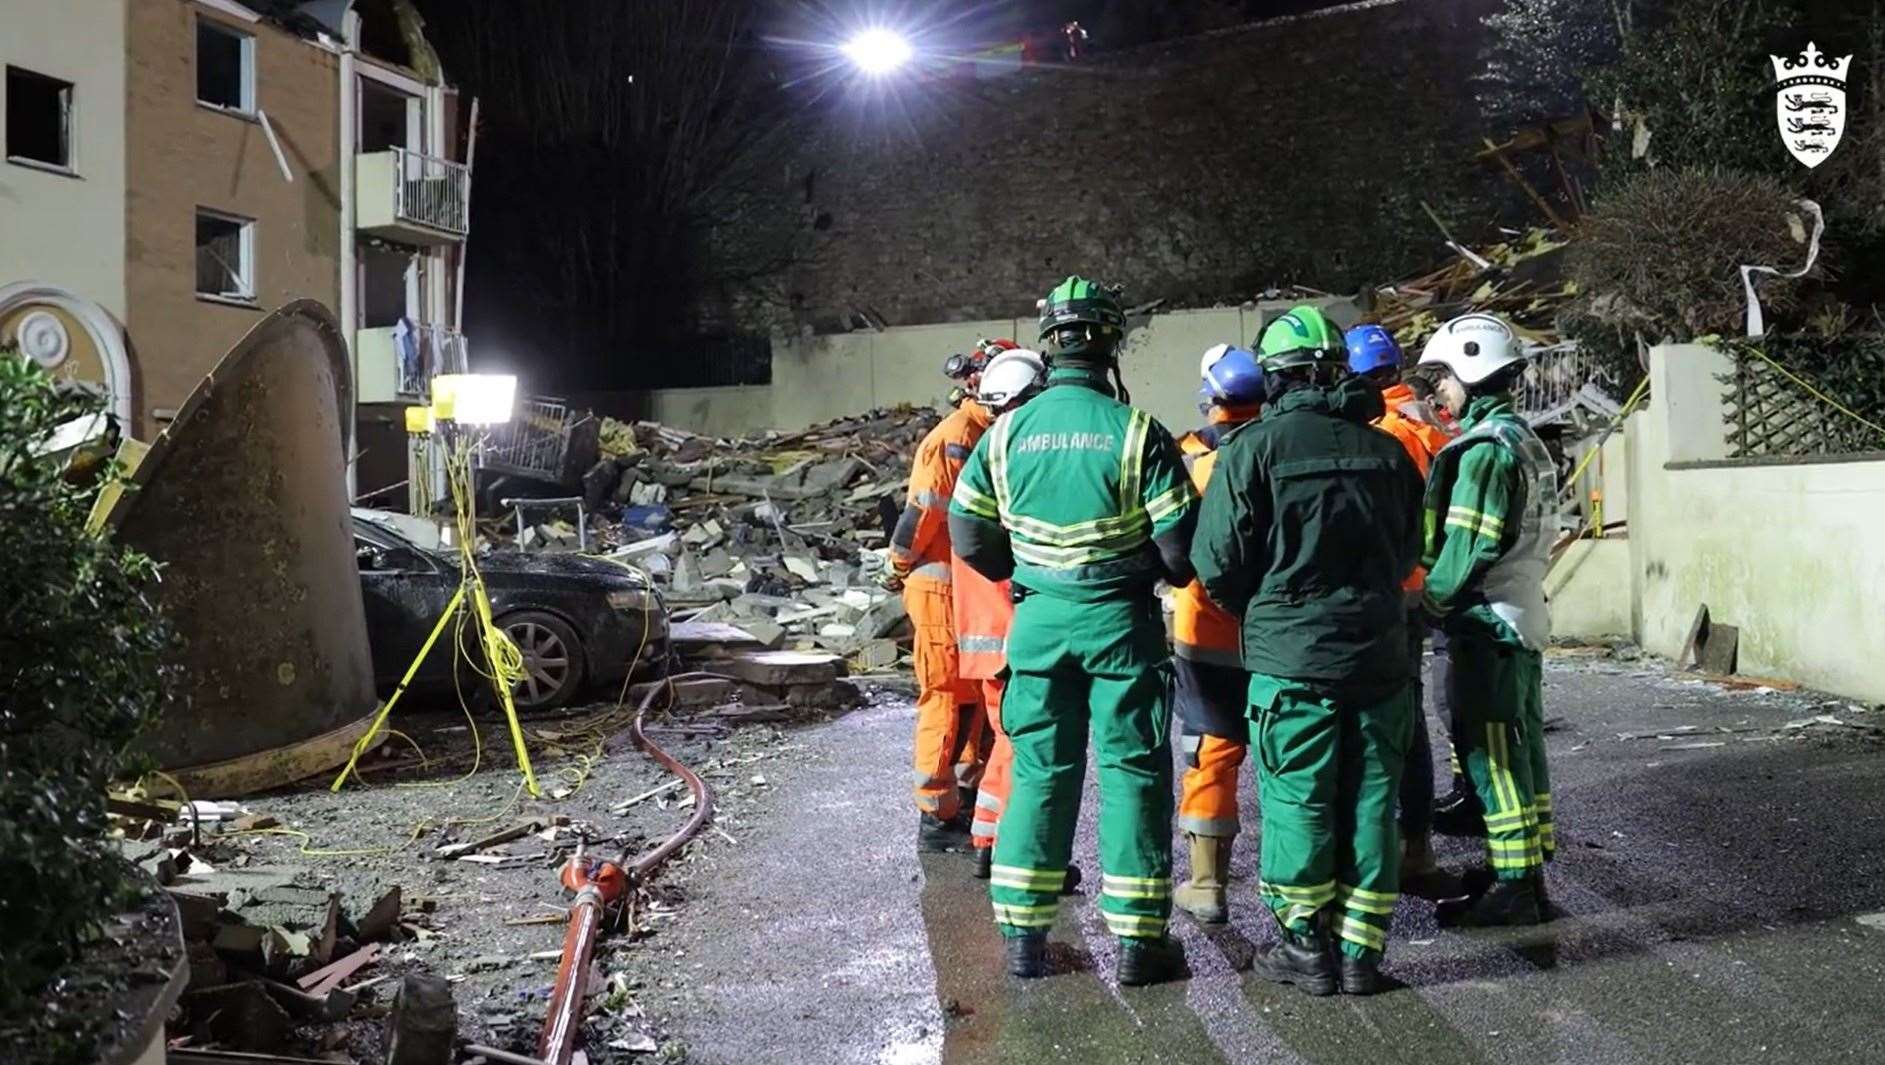 Emergency services at the scene of the explosion and fire (Government of Jersey/PA)